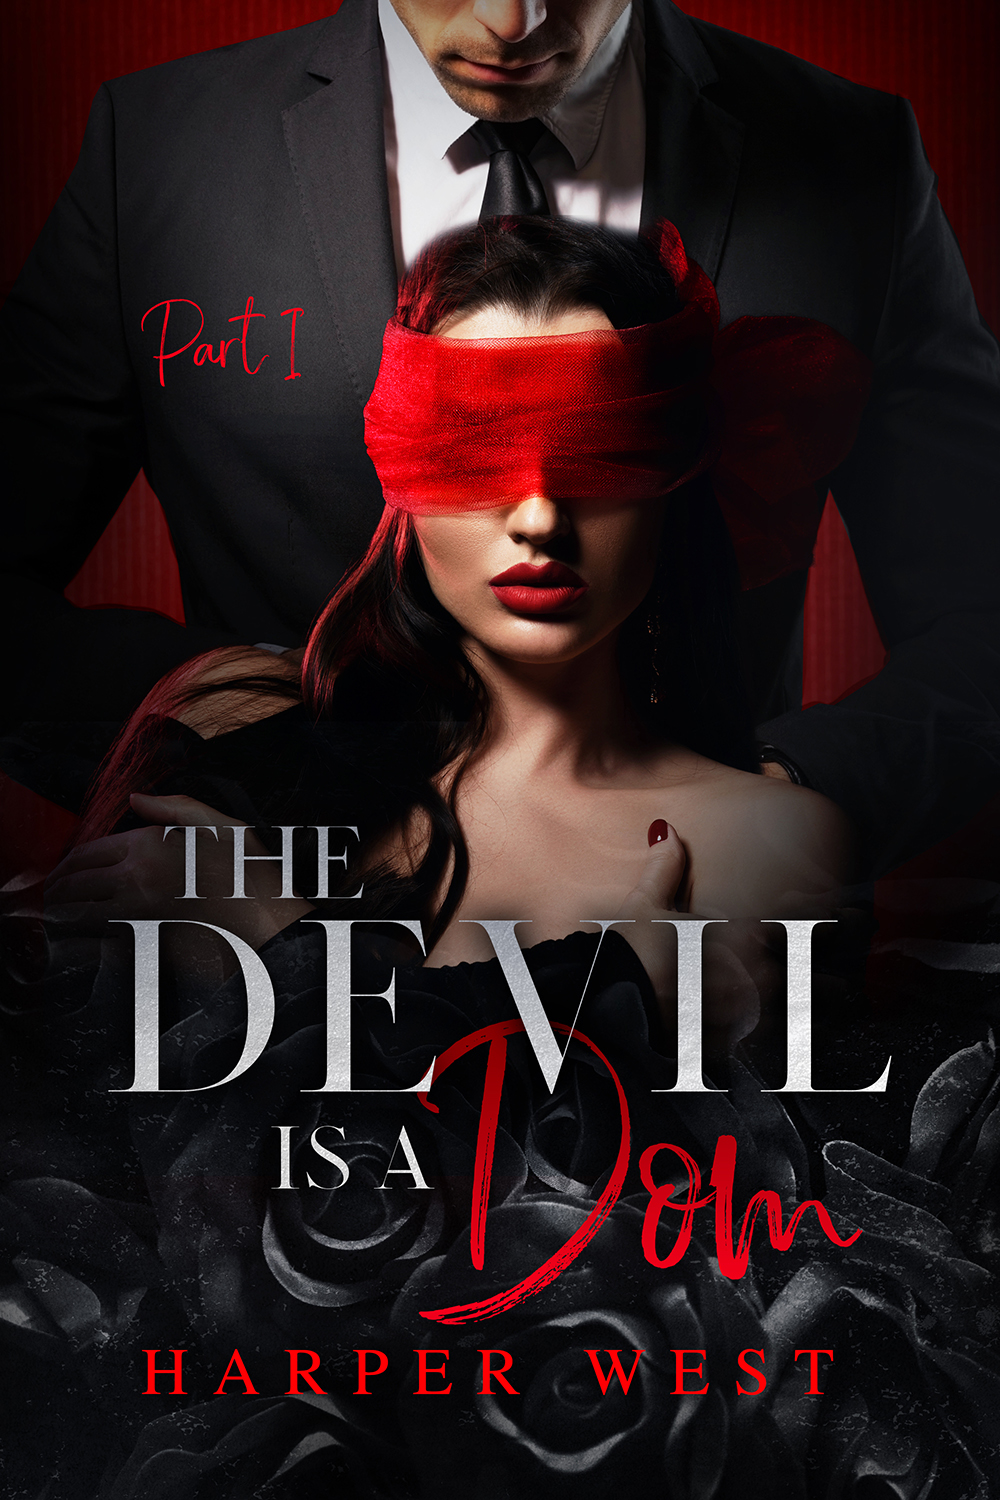 The Devil is a Dom: A Hate Filled Romance